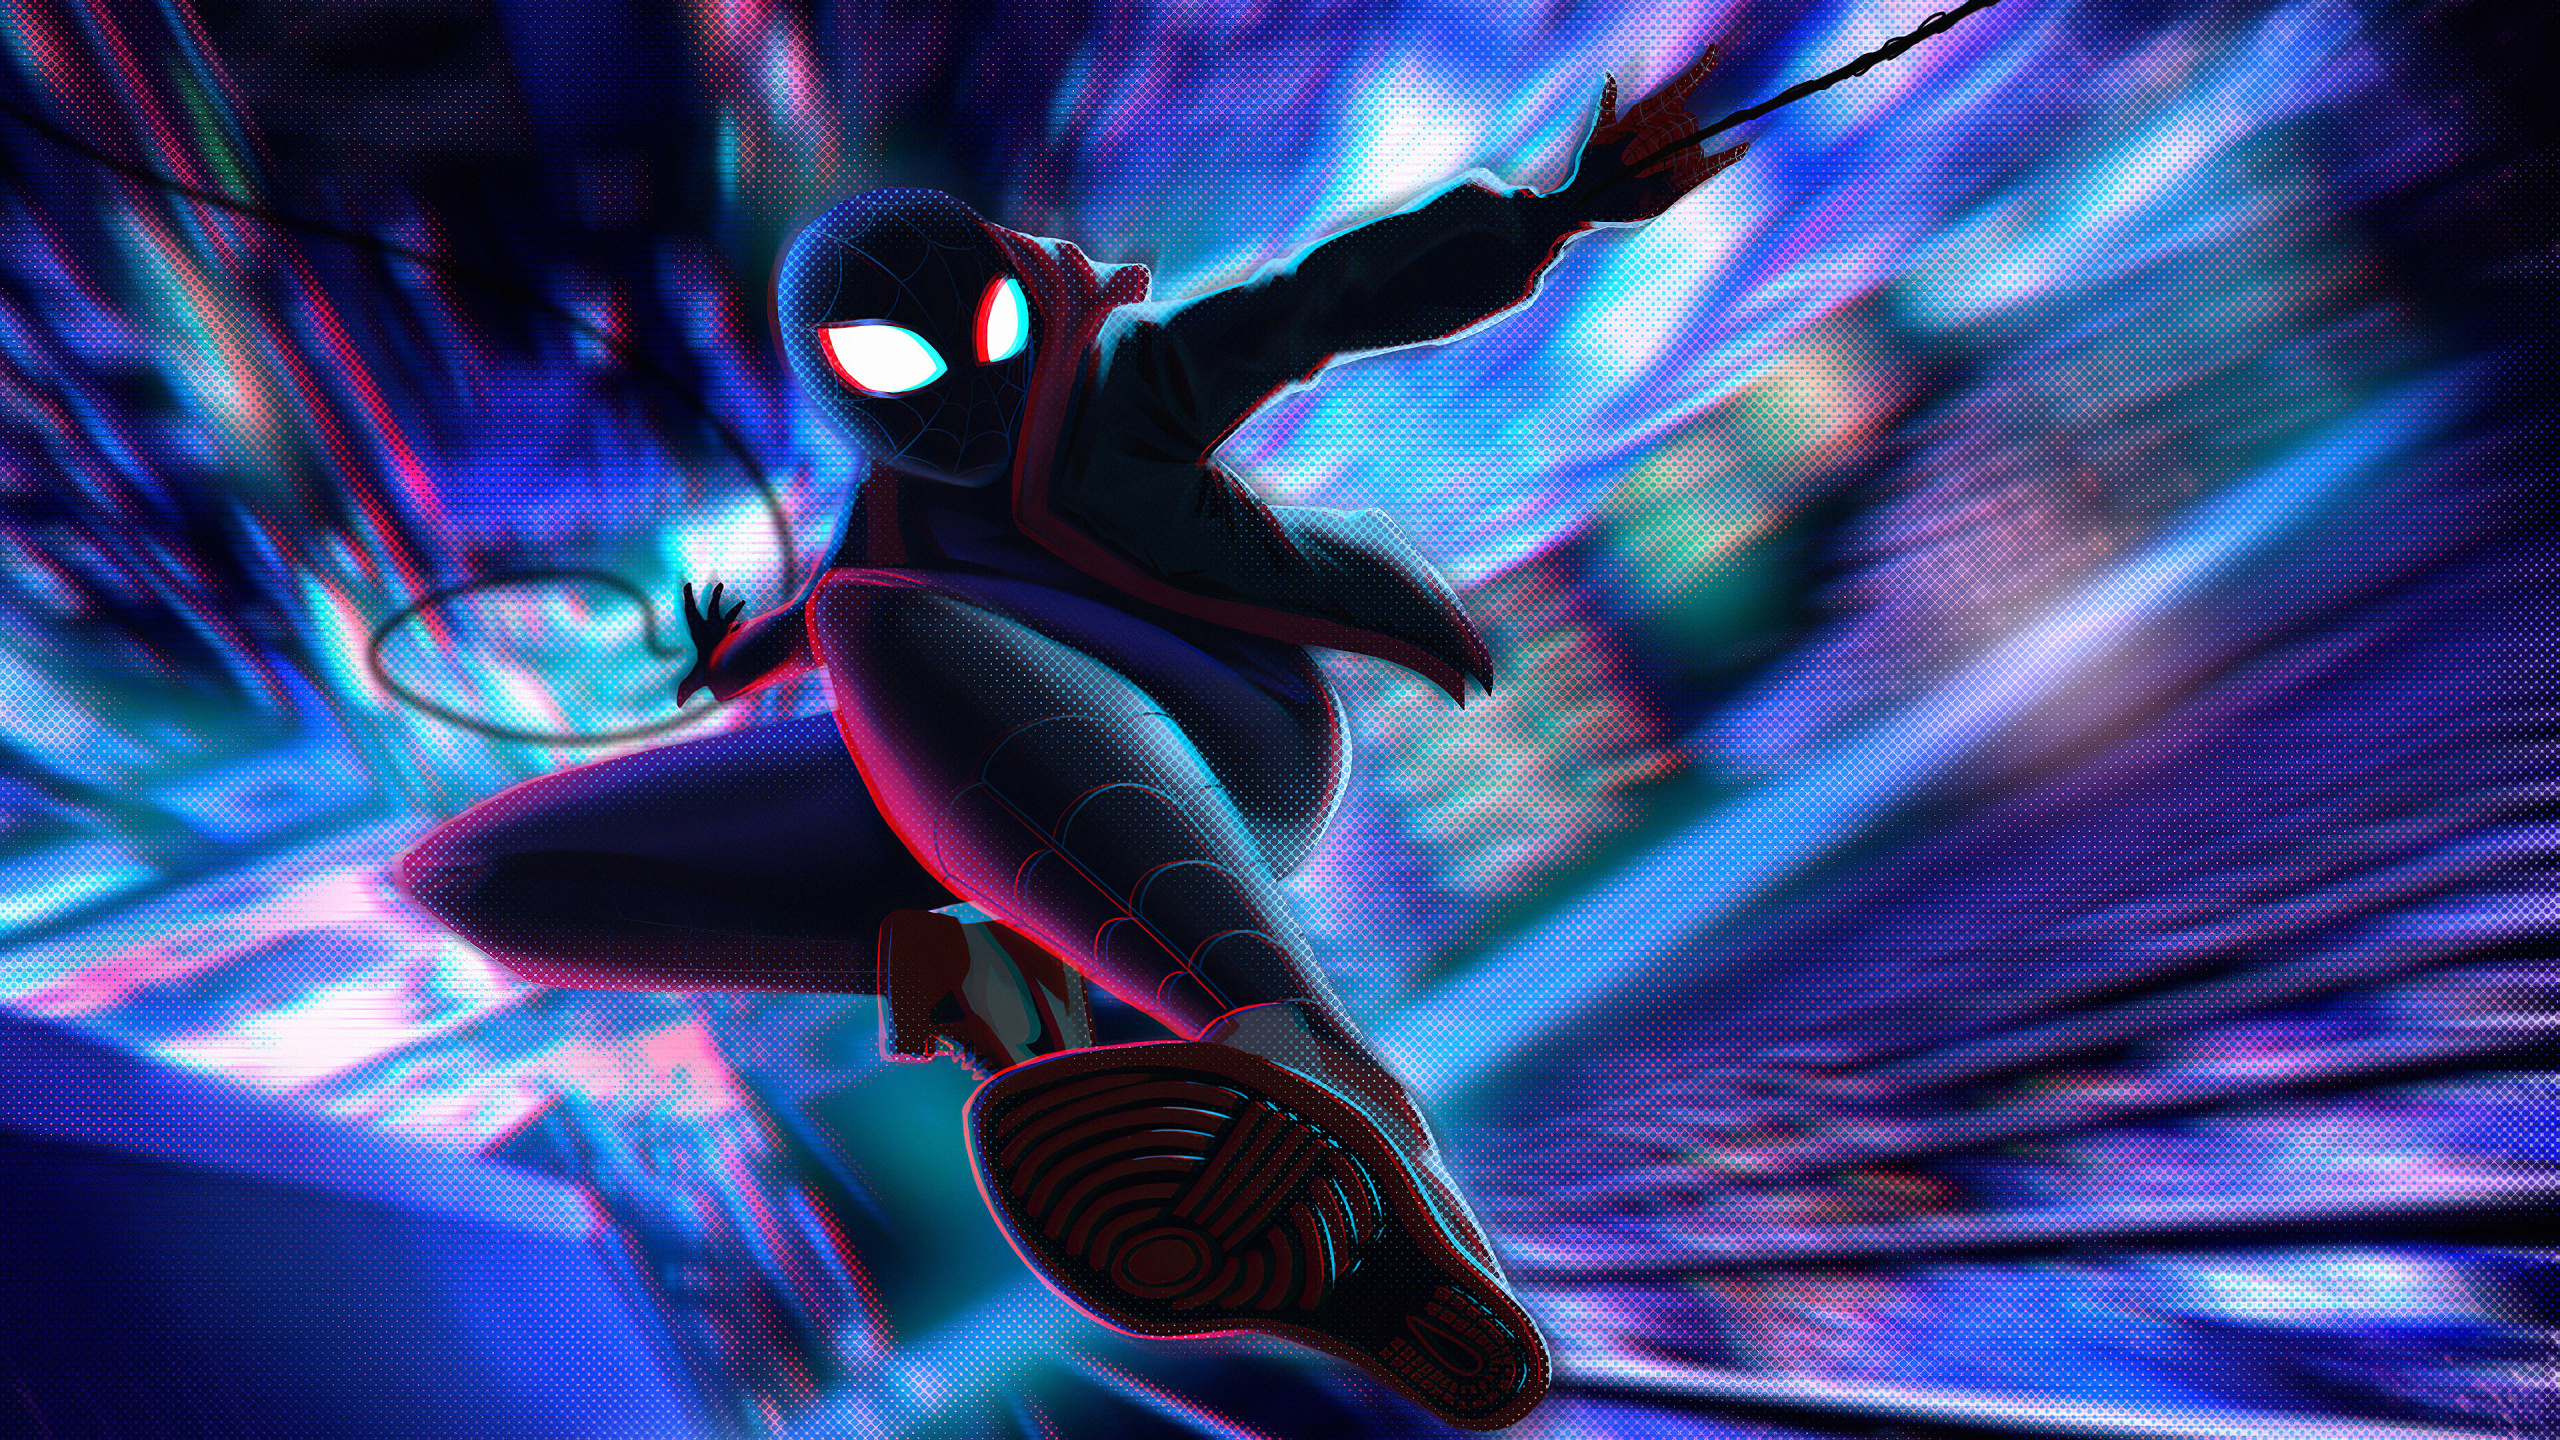 Miles Morales, Spider-man, Performance, Purple, Performing Arts. Wallpaper in 2560x1440 Resolution